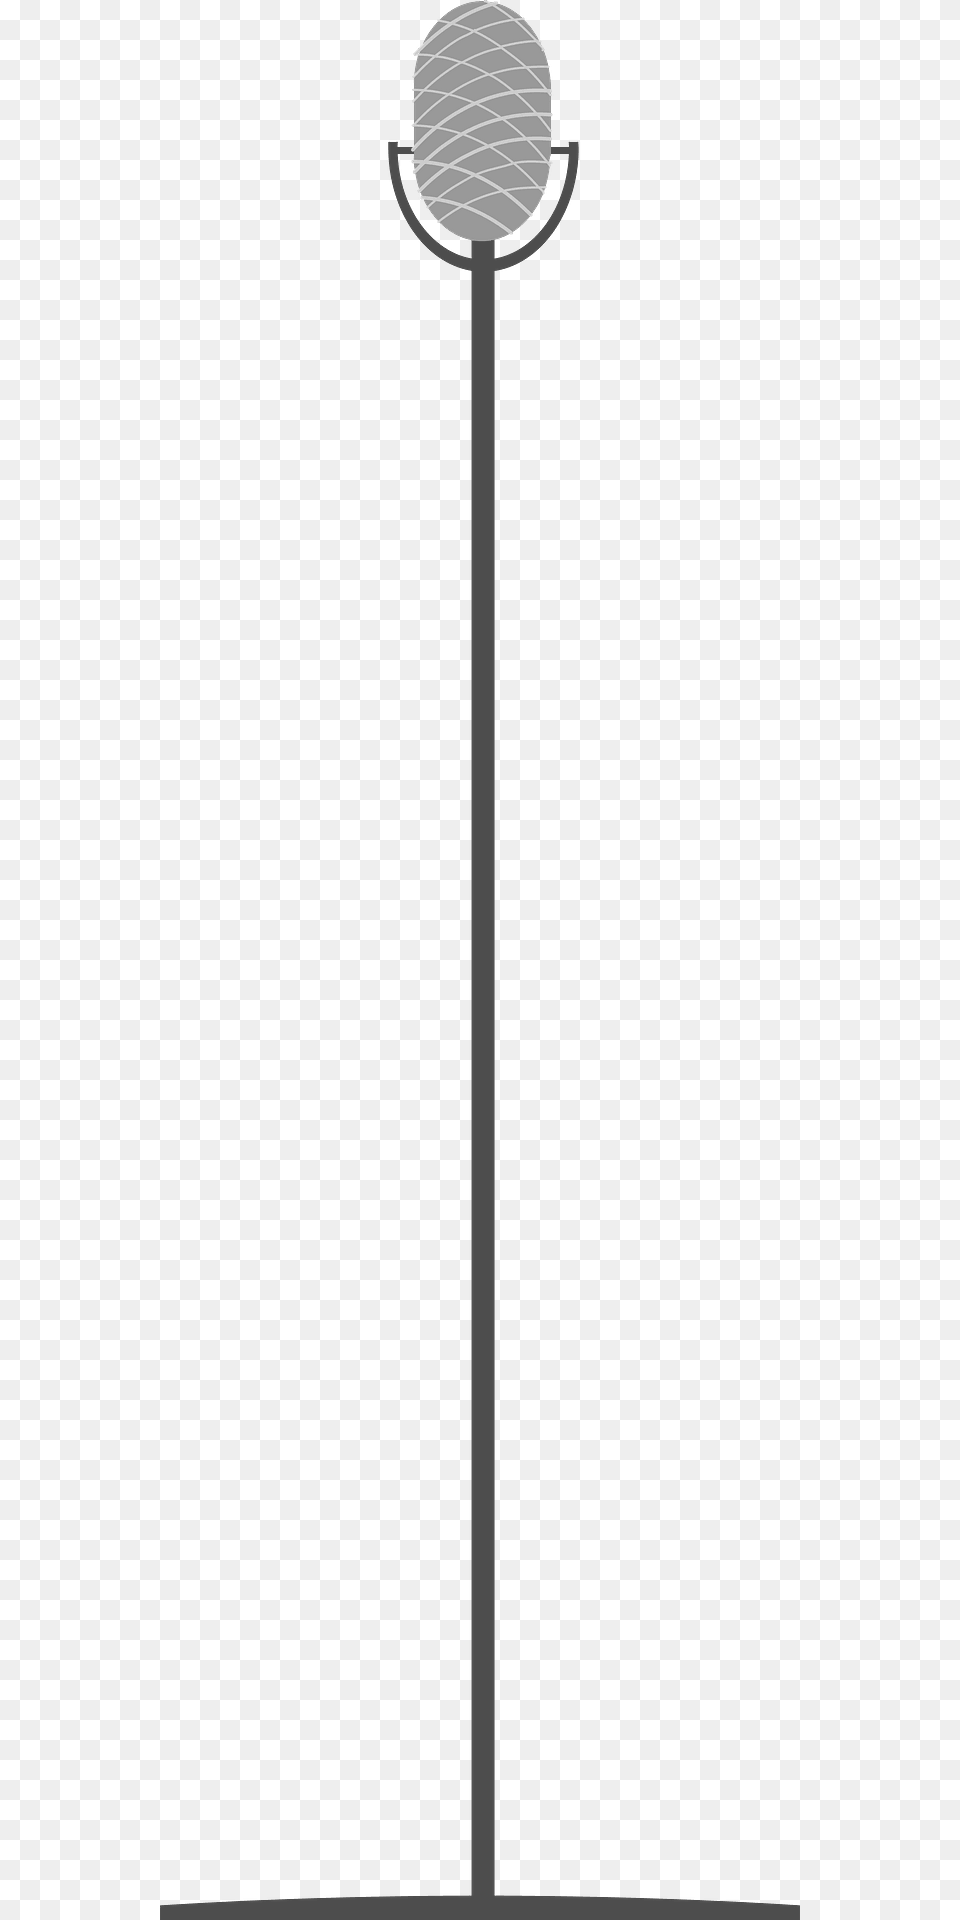 Microphone Clipart, Electrical Device, Utility Pole, Lamp Post, Lamp Free Transparent Png